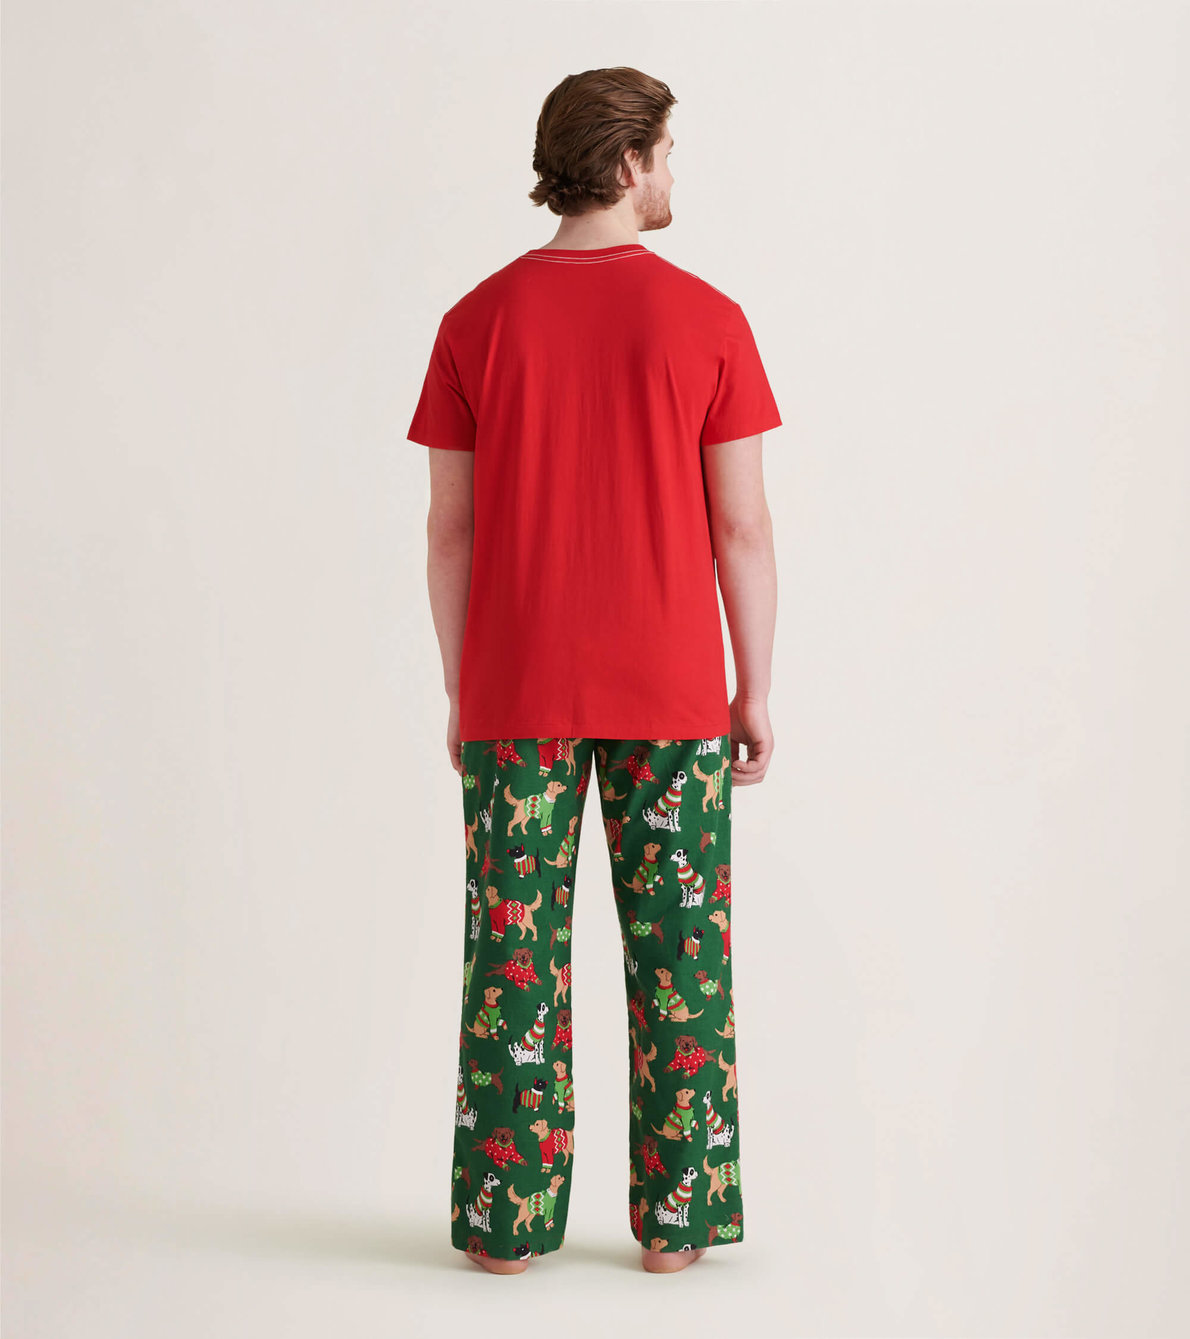 View larger image of Woofing Christmas Men's Flannel Pajama Pants